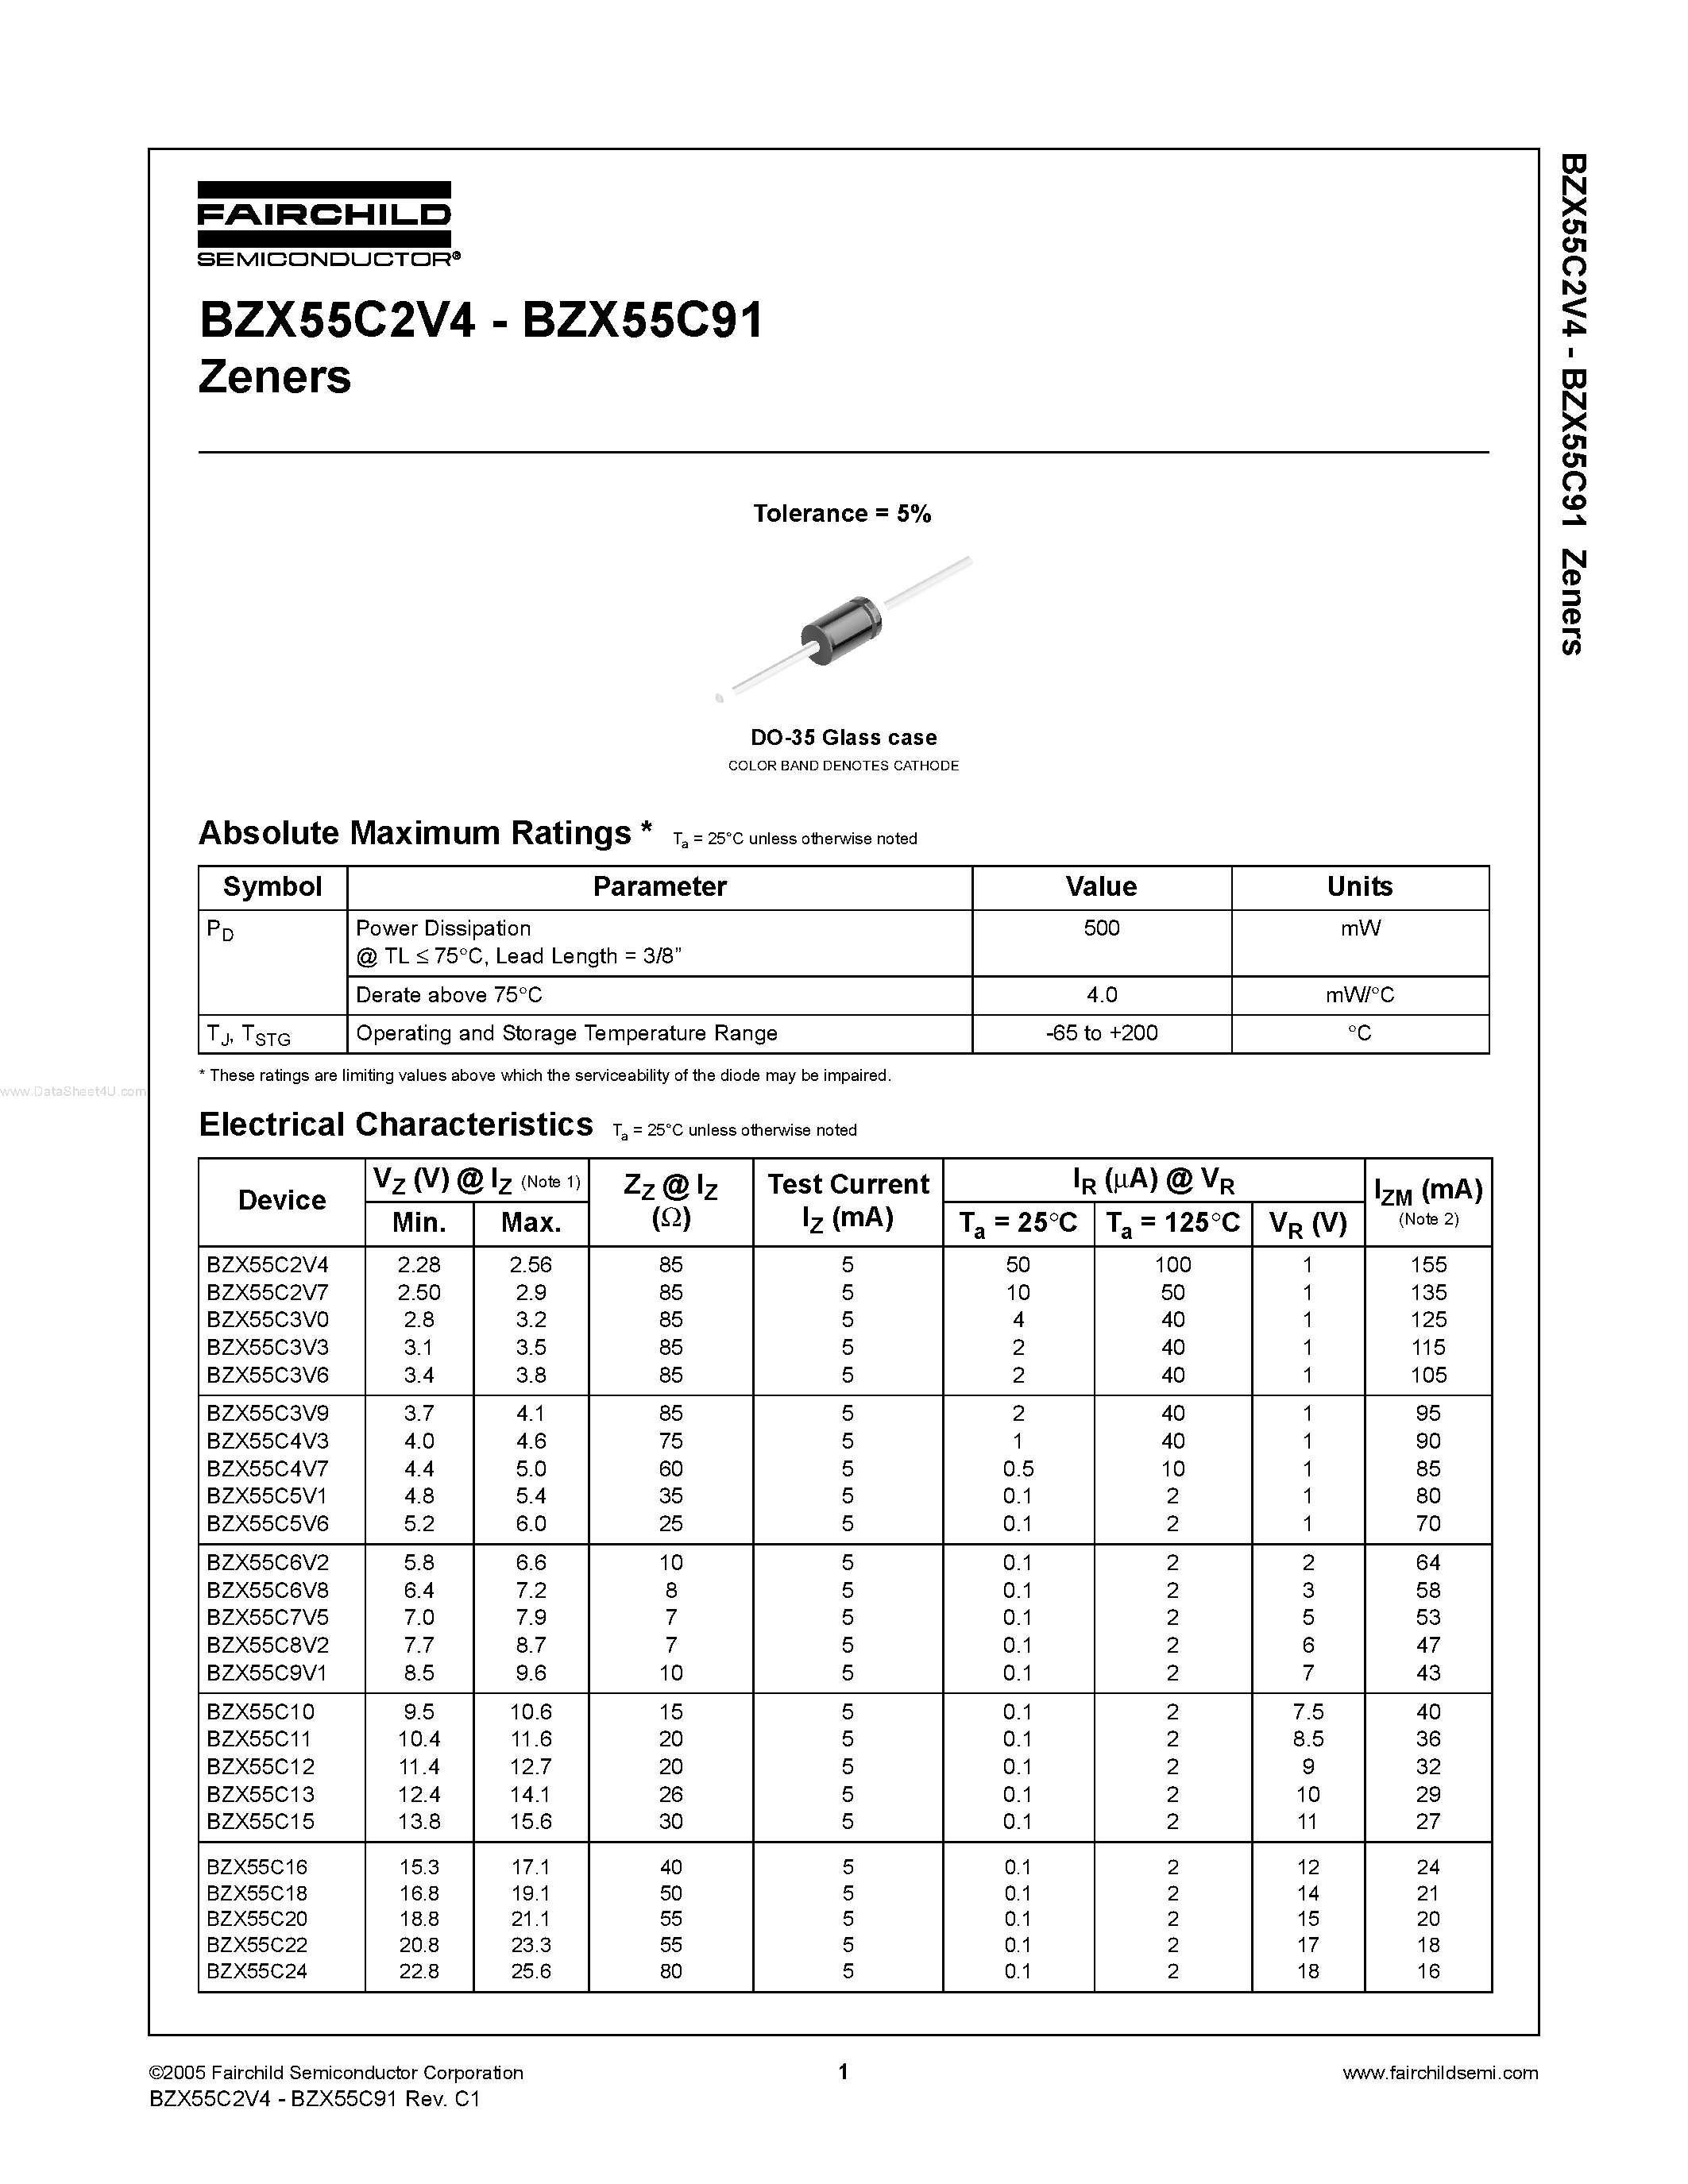 Datasheet BZX55C1x - (BZX55C2V4 - BZX55C91) Zeners page 1